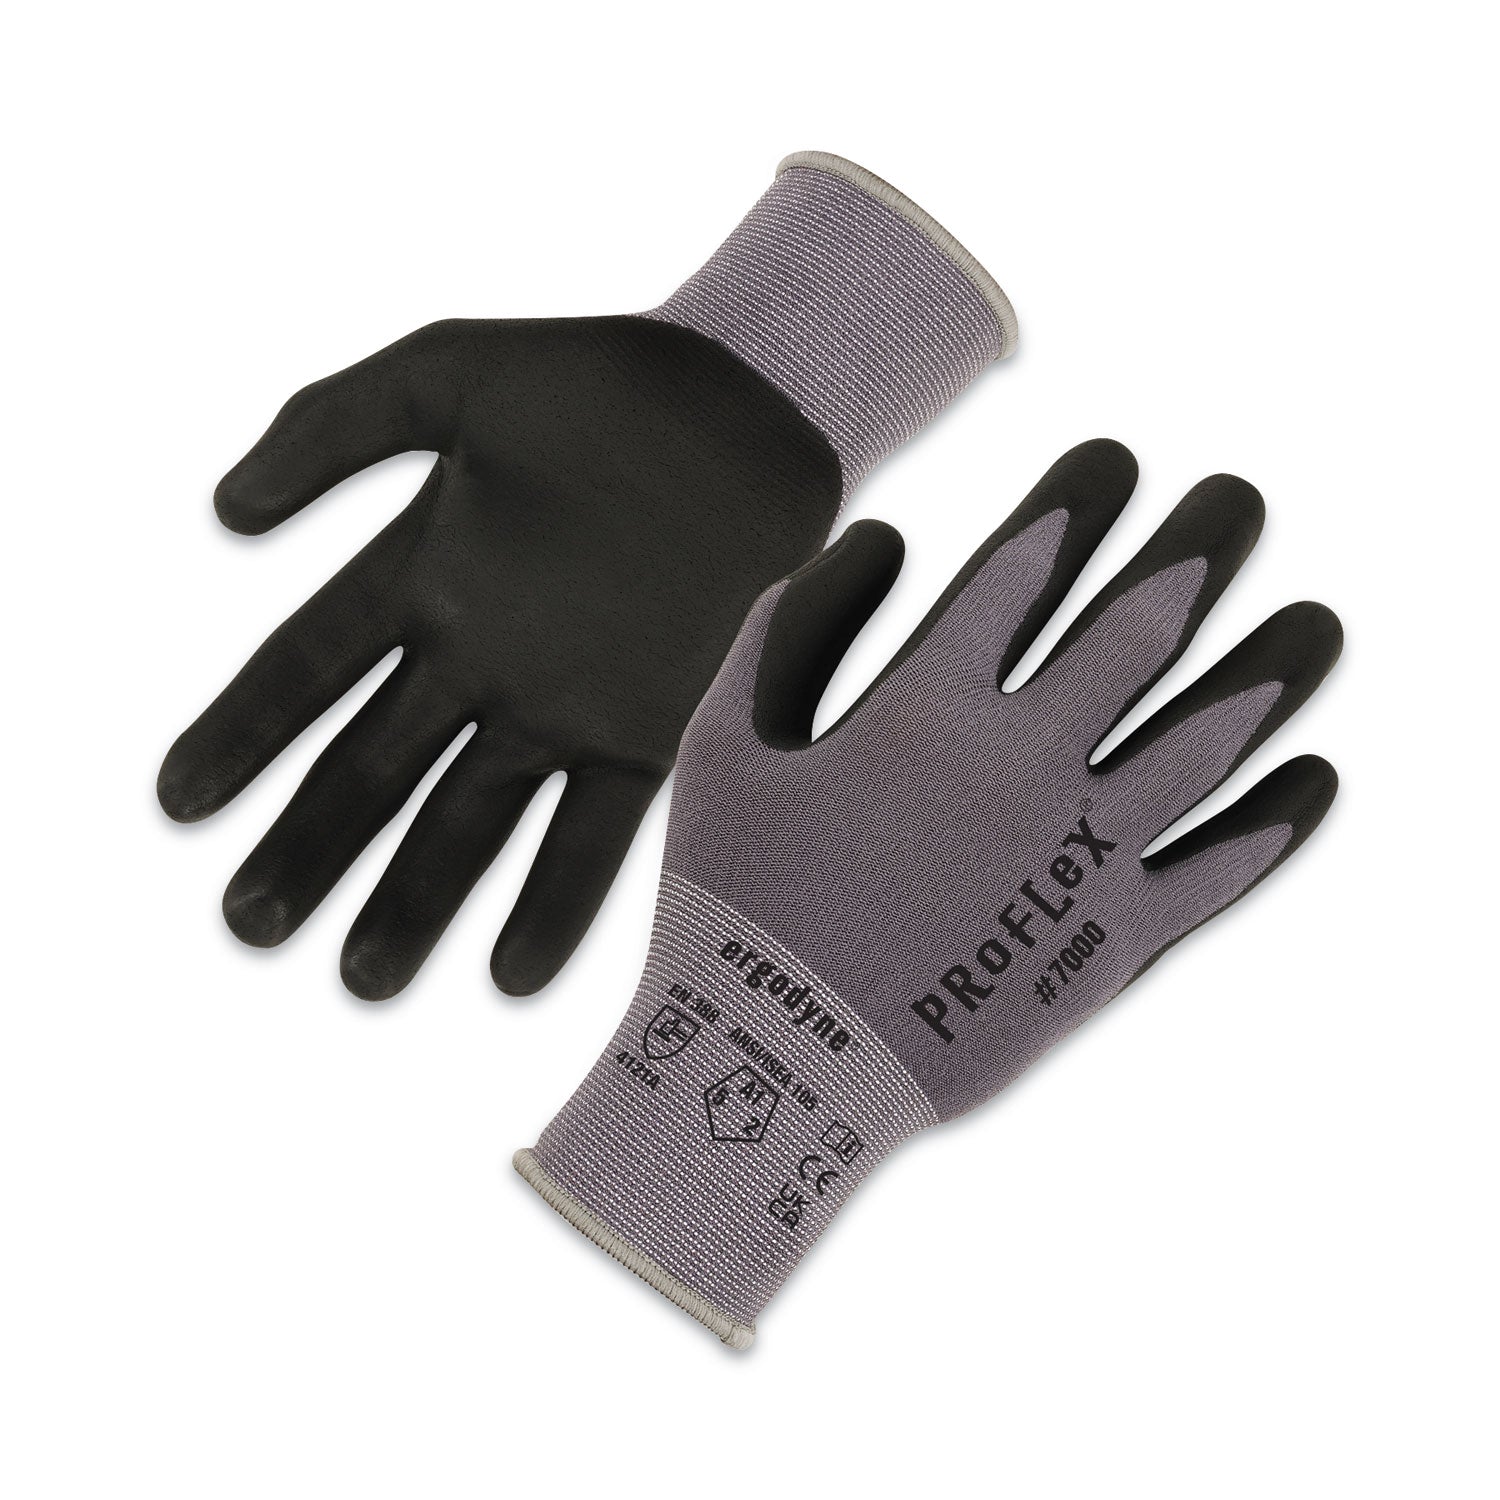 proflex-7000-nitrile-coated-gloves-microfoam-palm-gray-small-pair-ships-in-1-3-business-days_ego10372 - 1